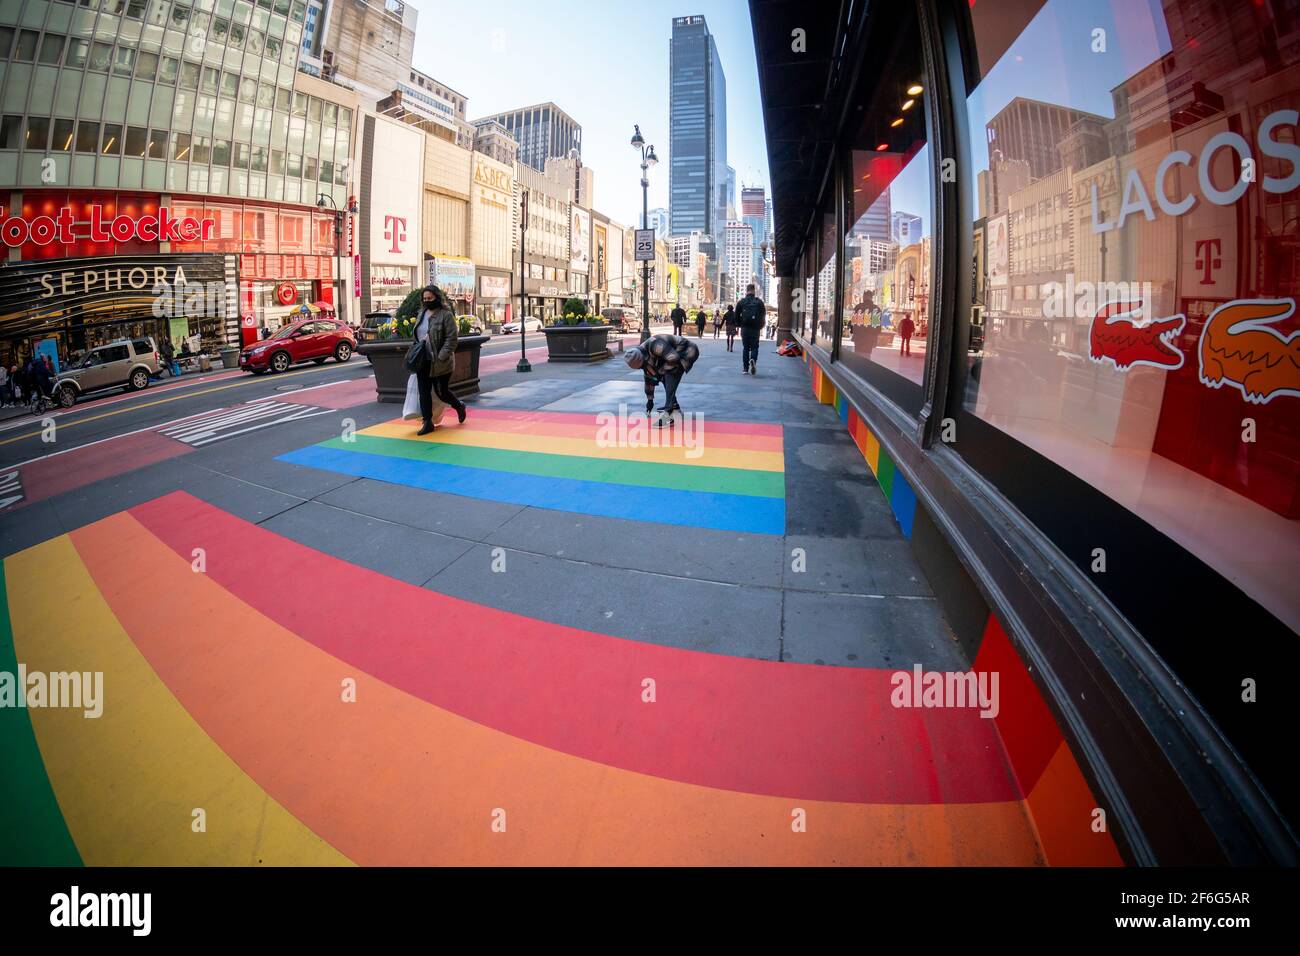 A worker removes a vinyl rainbow from in front of Macy's department store  on Tuesday, March 30, 2021. The display was part of a promotion for the  Lacoste X Polaroid collaboration that